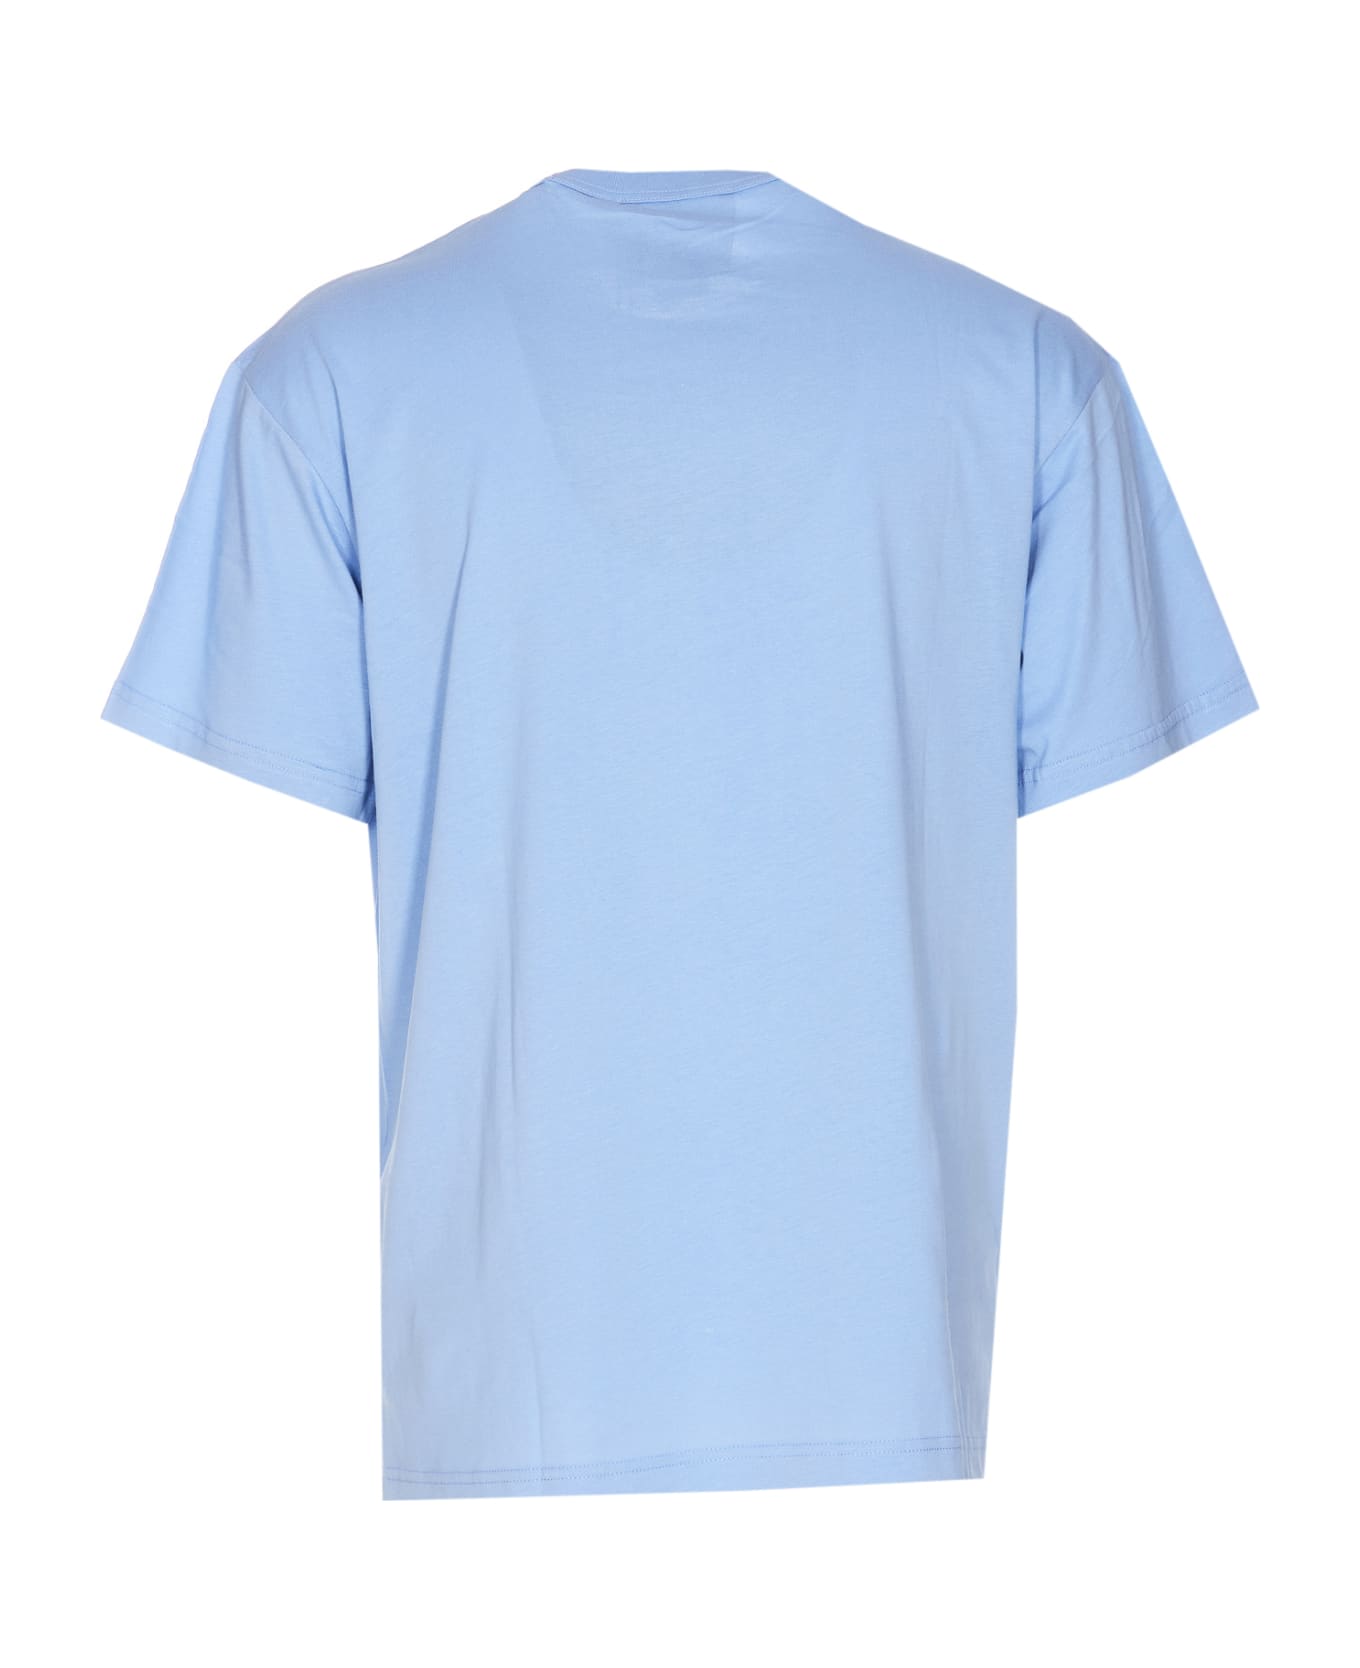 Versace Jeans Couture T-shirt - Blue シャツ